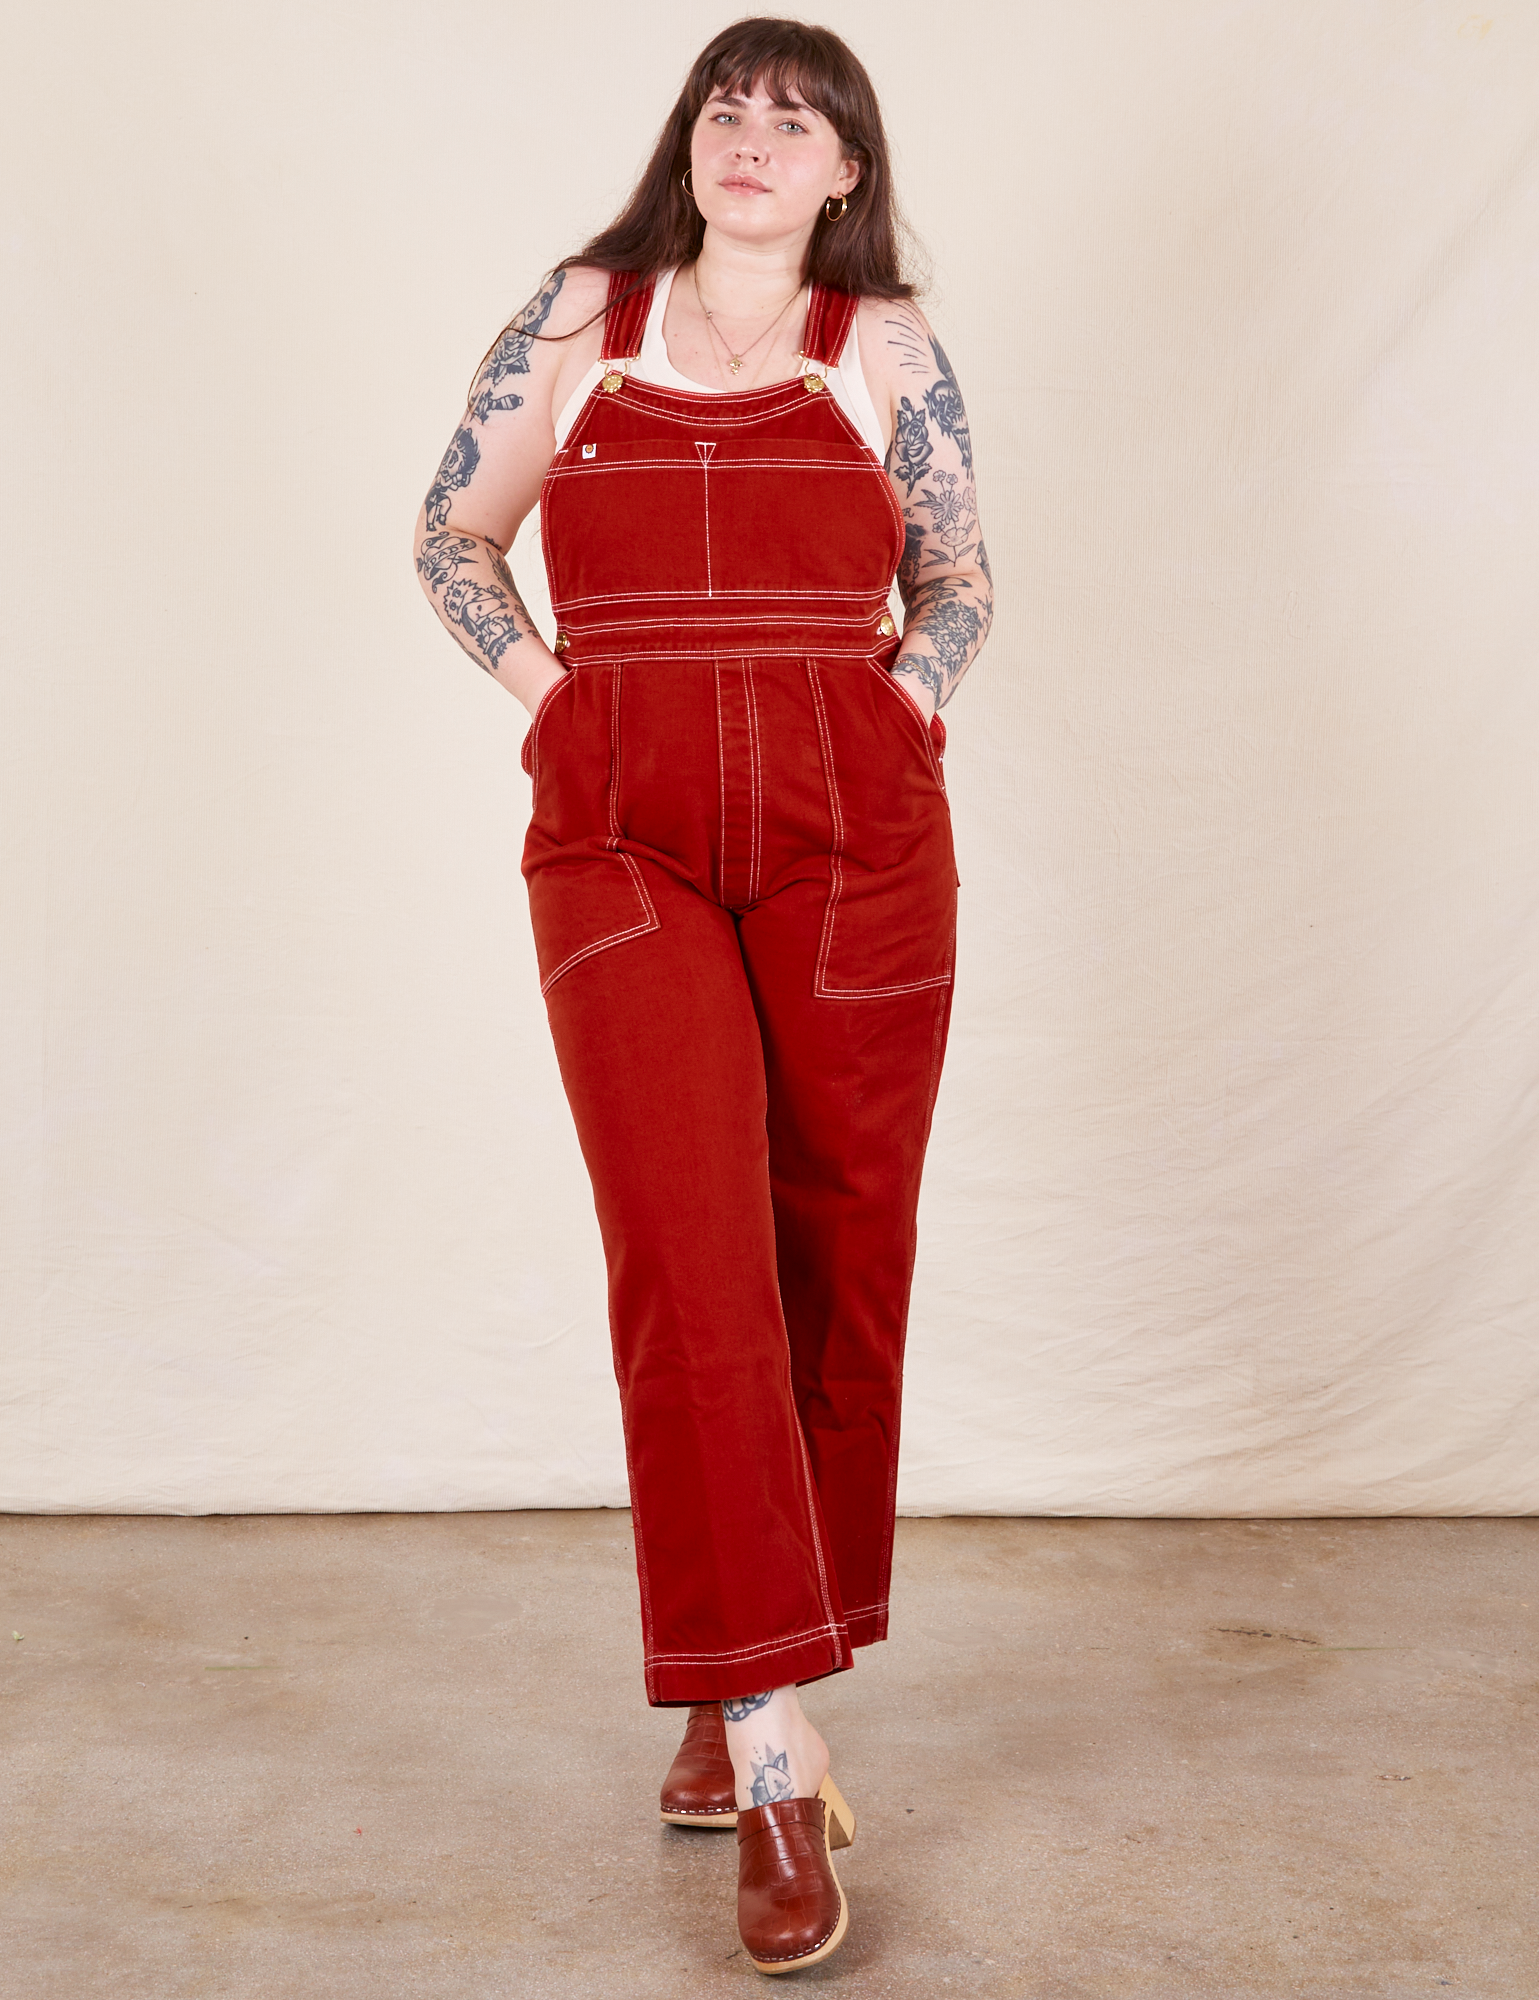 Sydney is wearing Original Overalls in Paprika and vintage off-white Tank Top